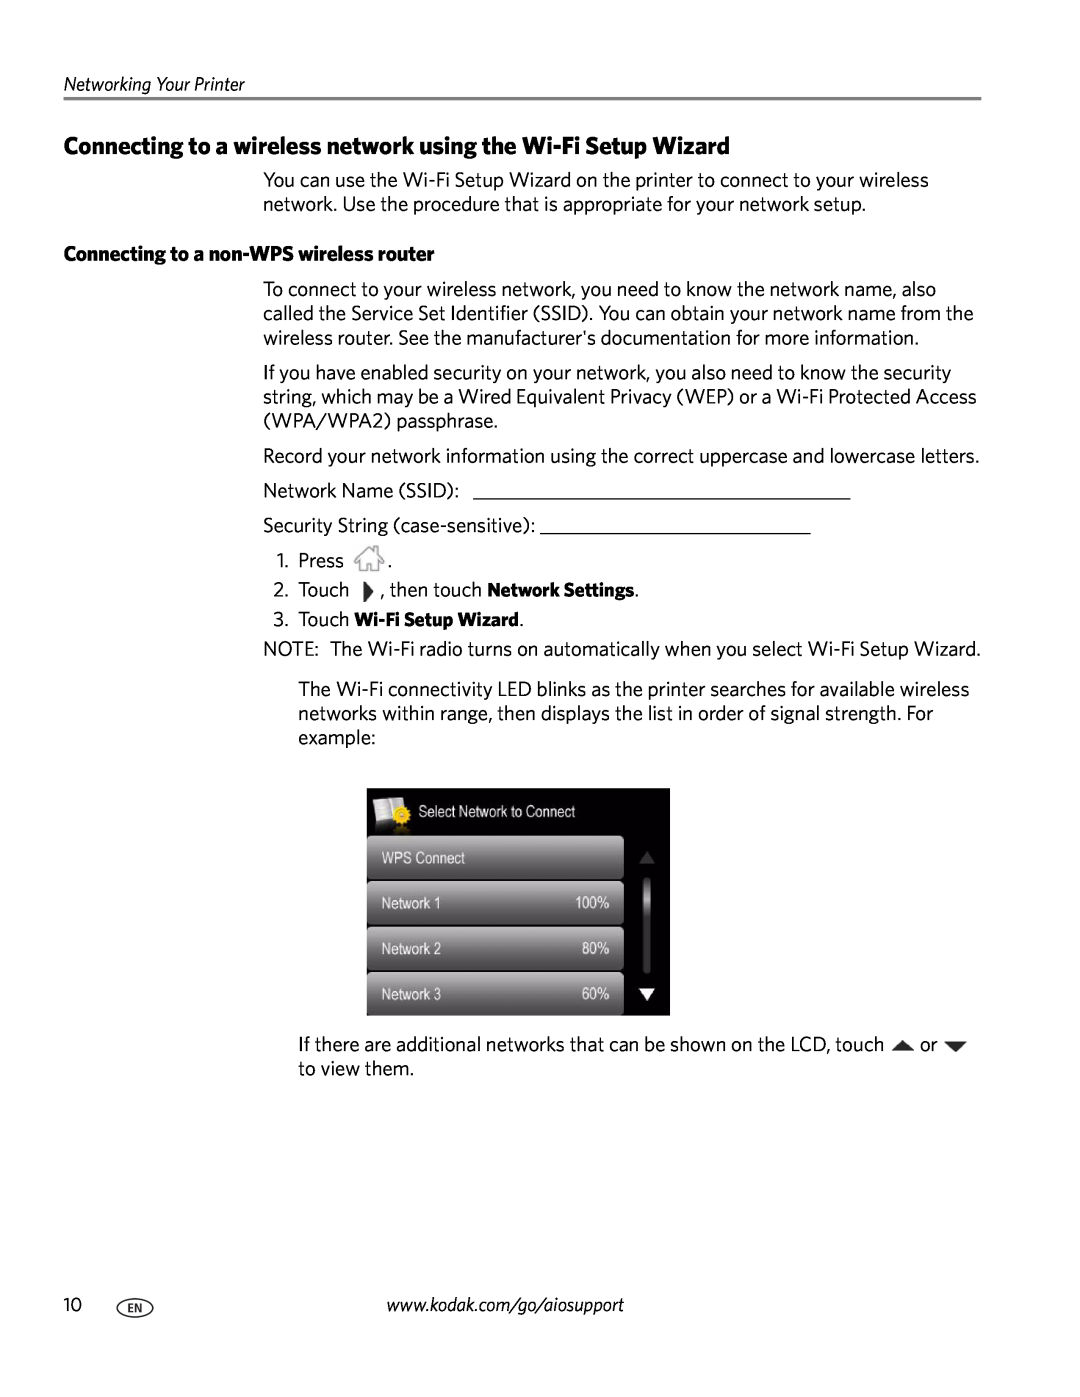 Kodak 7.1 manual Connecting to a wireless network using the Wi-Fi Setup Wizard, Connecting to a non-WPS wireless router 